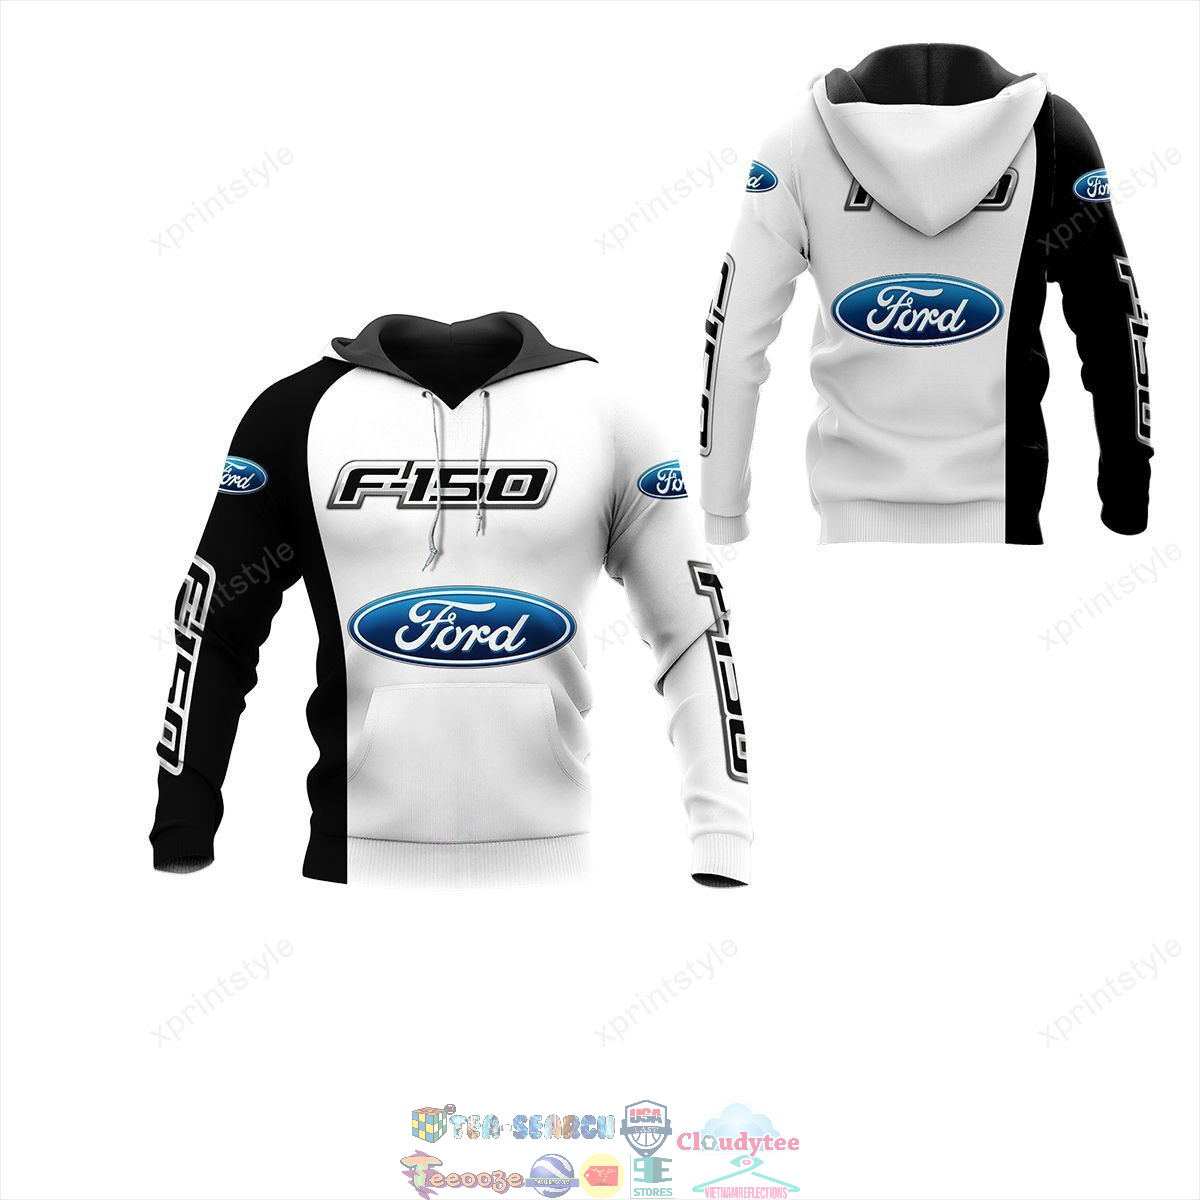 Ford F150 ver 10 hoodie and t-shirt